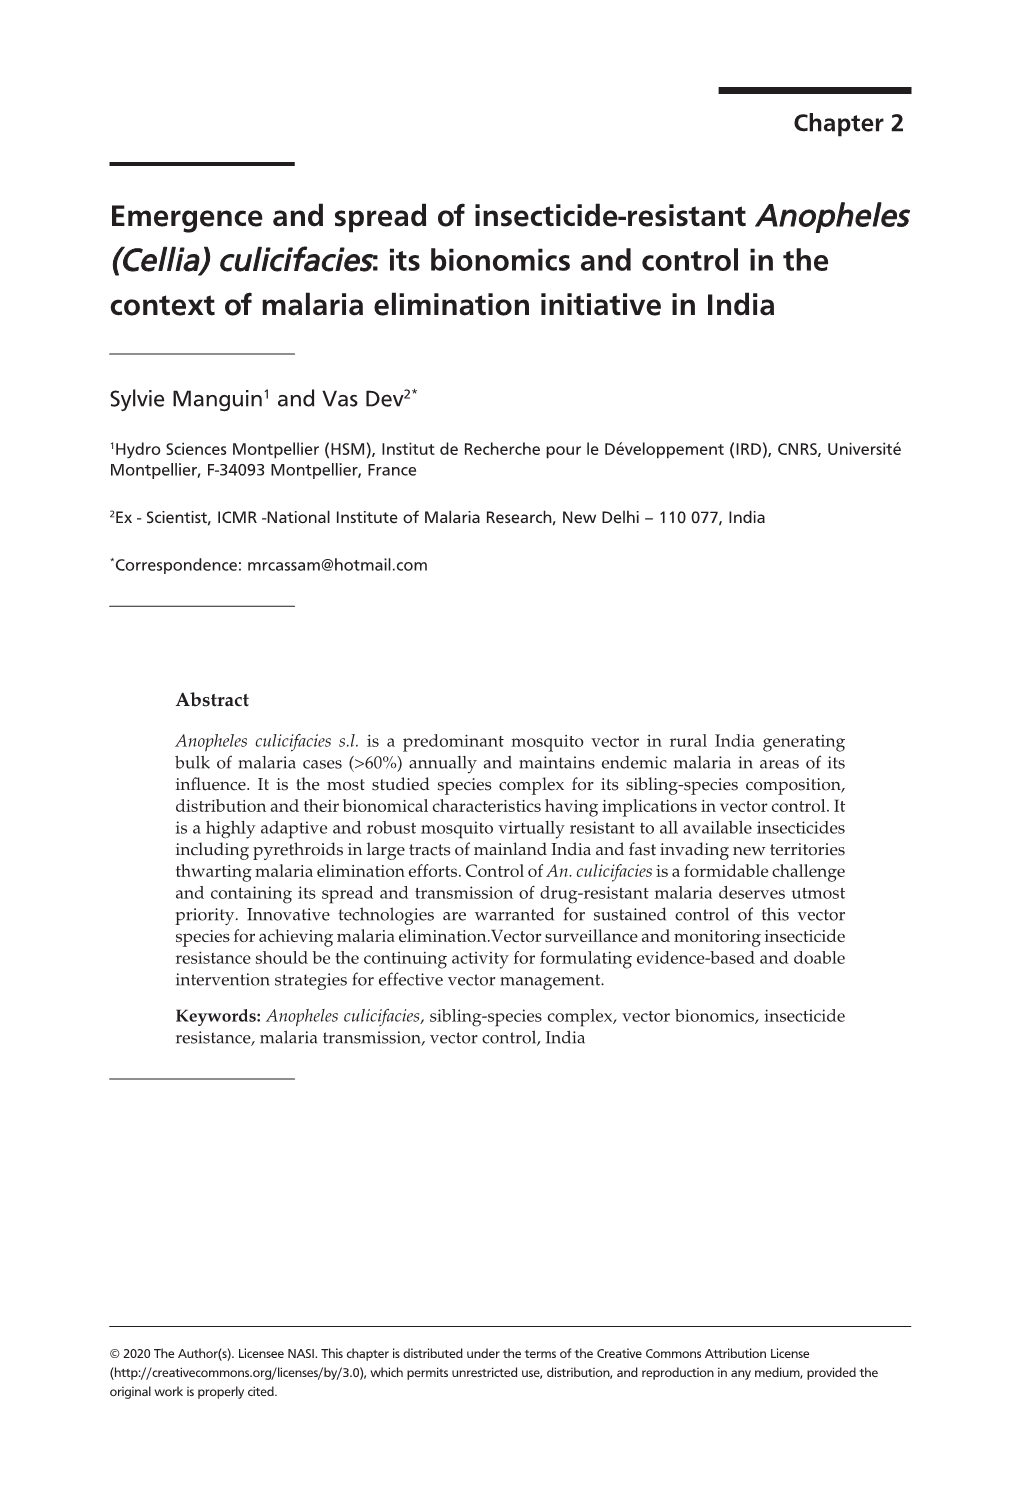 (Cellia) Culicifacies: Its Bionomics and Control in the Context of Malaria Elimination Initiative in India